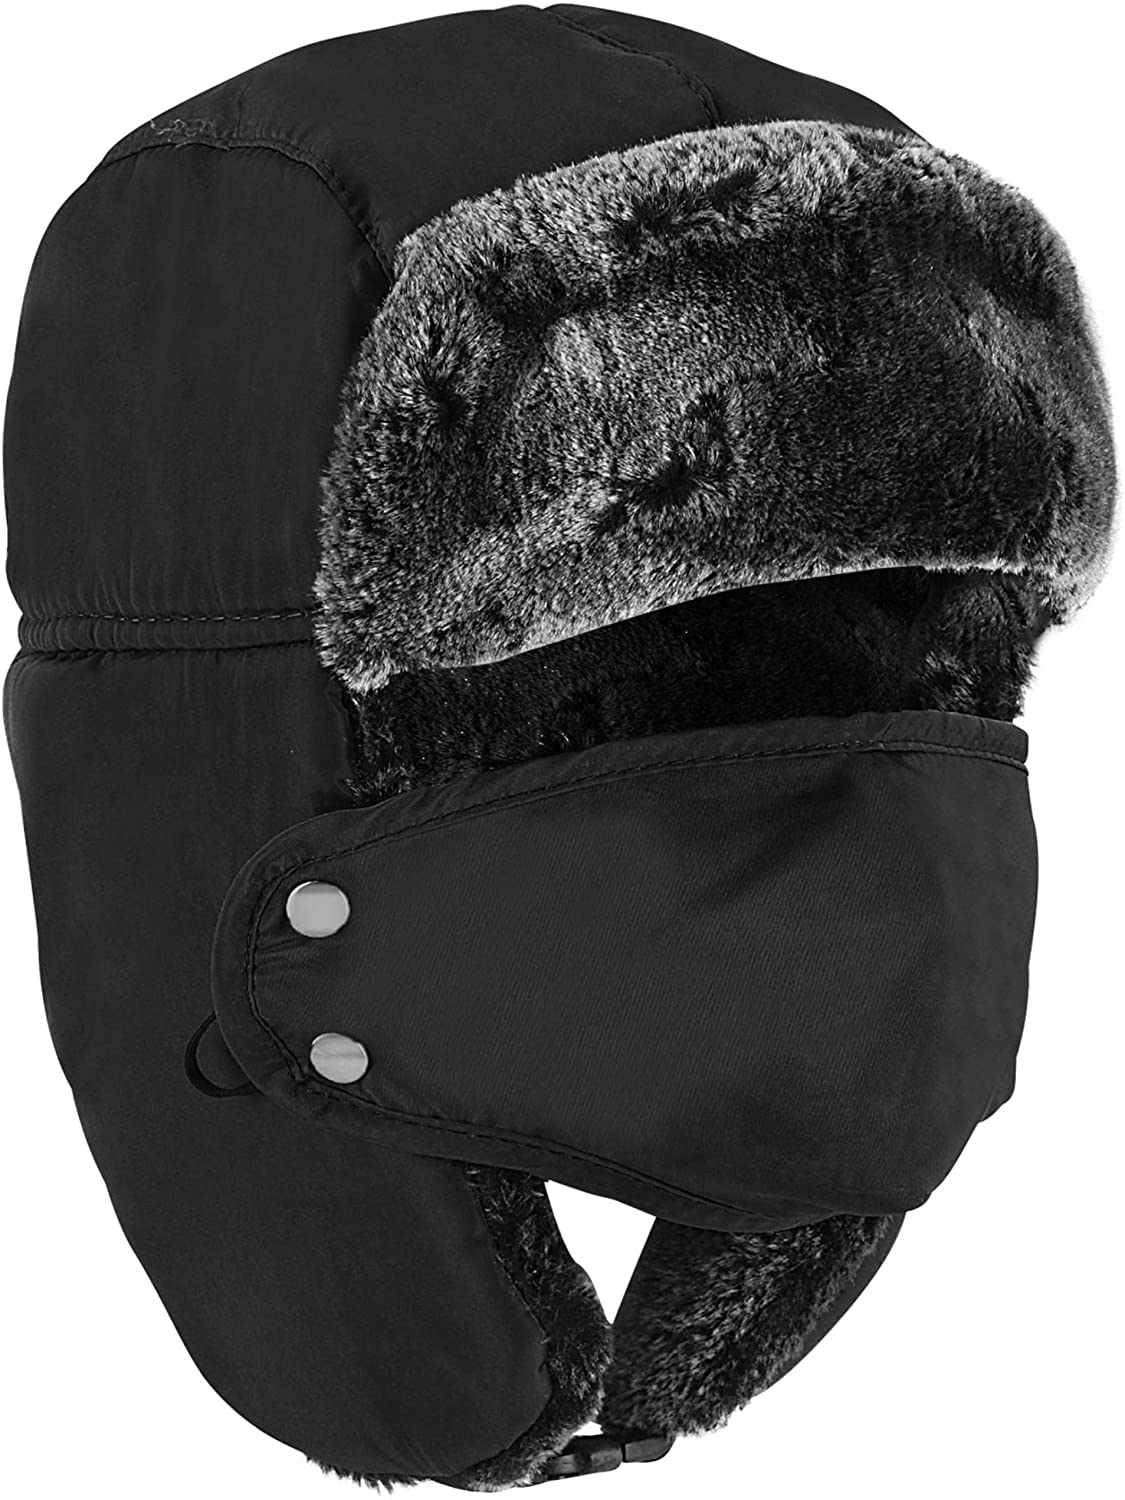 2PCS Mouth Mask Protective Face Masks Ushanka Men's Winter Hat with Ear Flaps - Russian Trooper Trapper Hat for Men Women